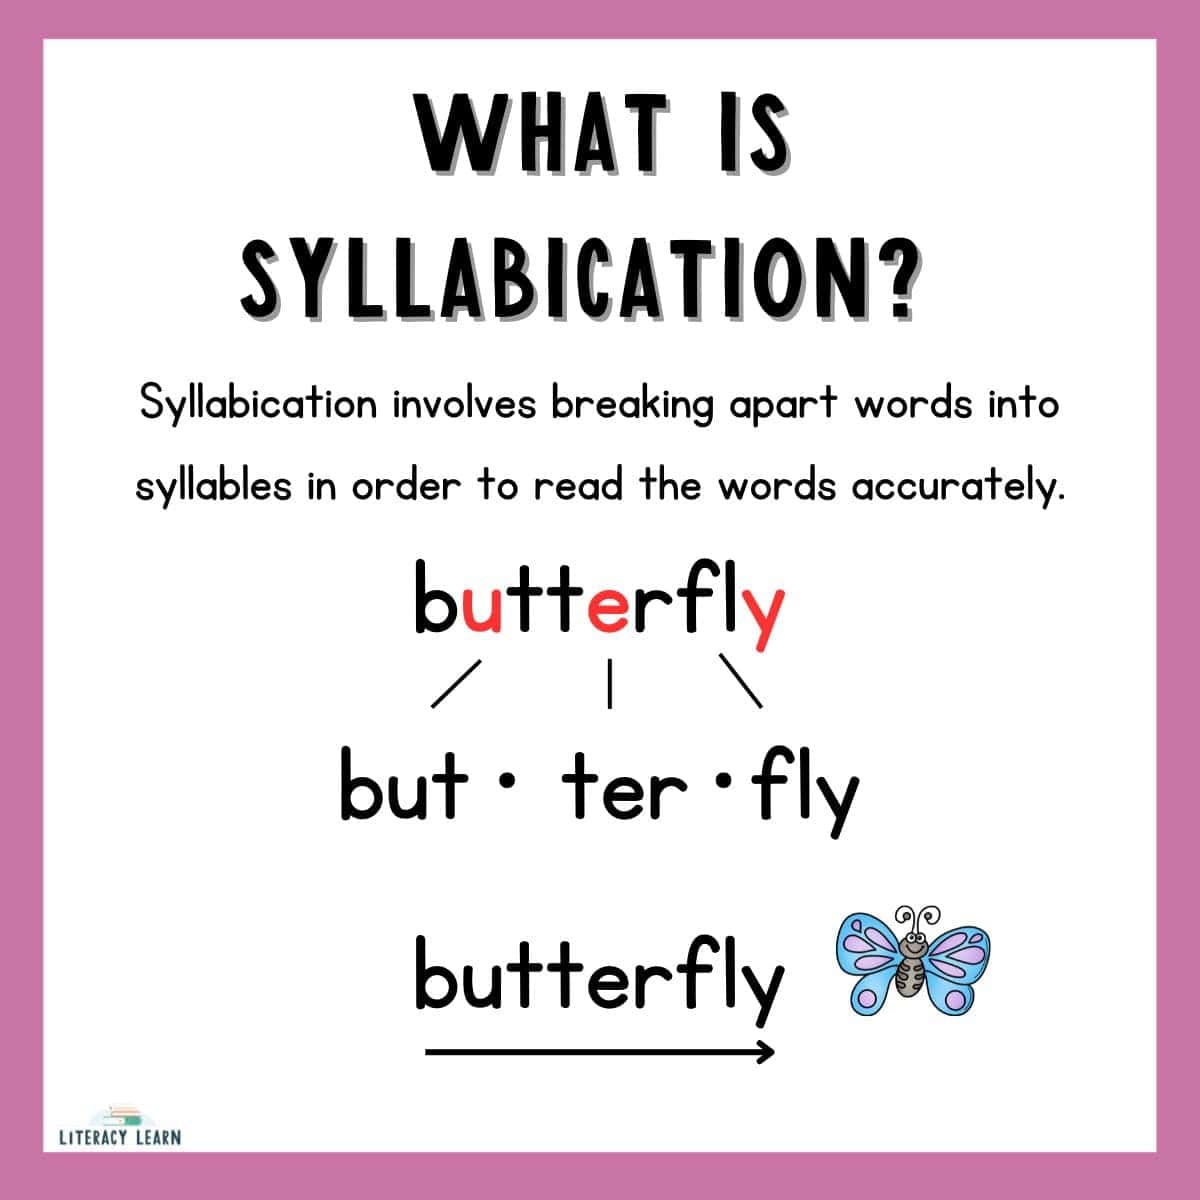 Purple graphic entitled "What is syllabication?" with definition and example of a word divided into syllables.